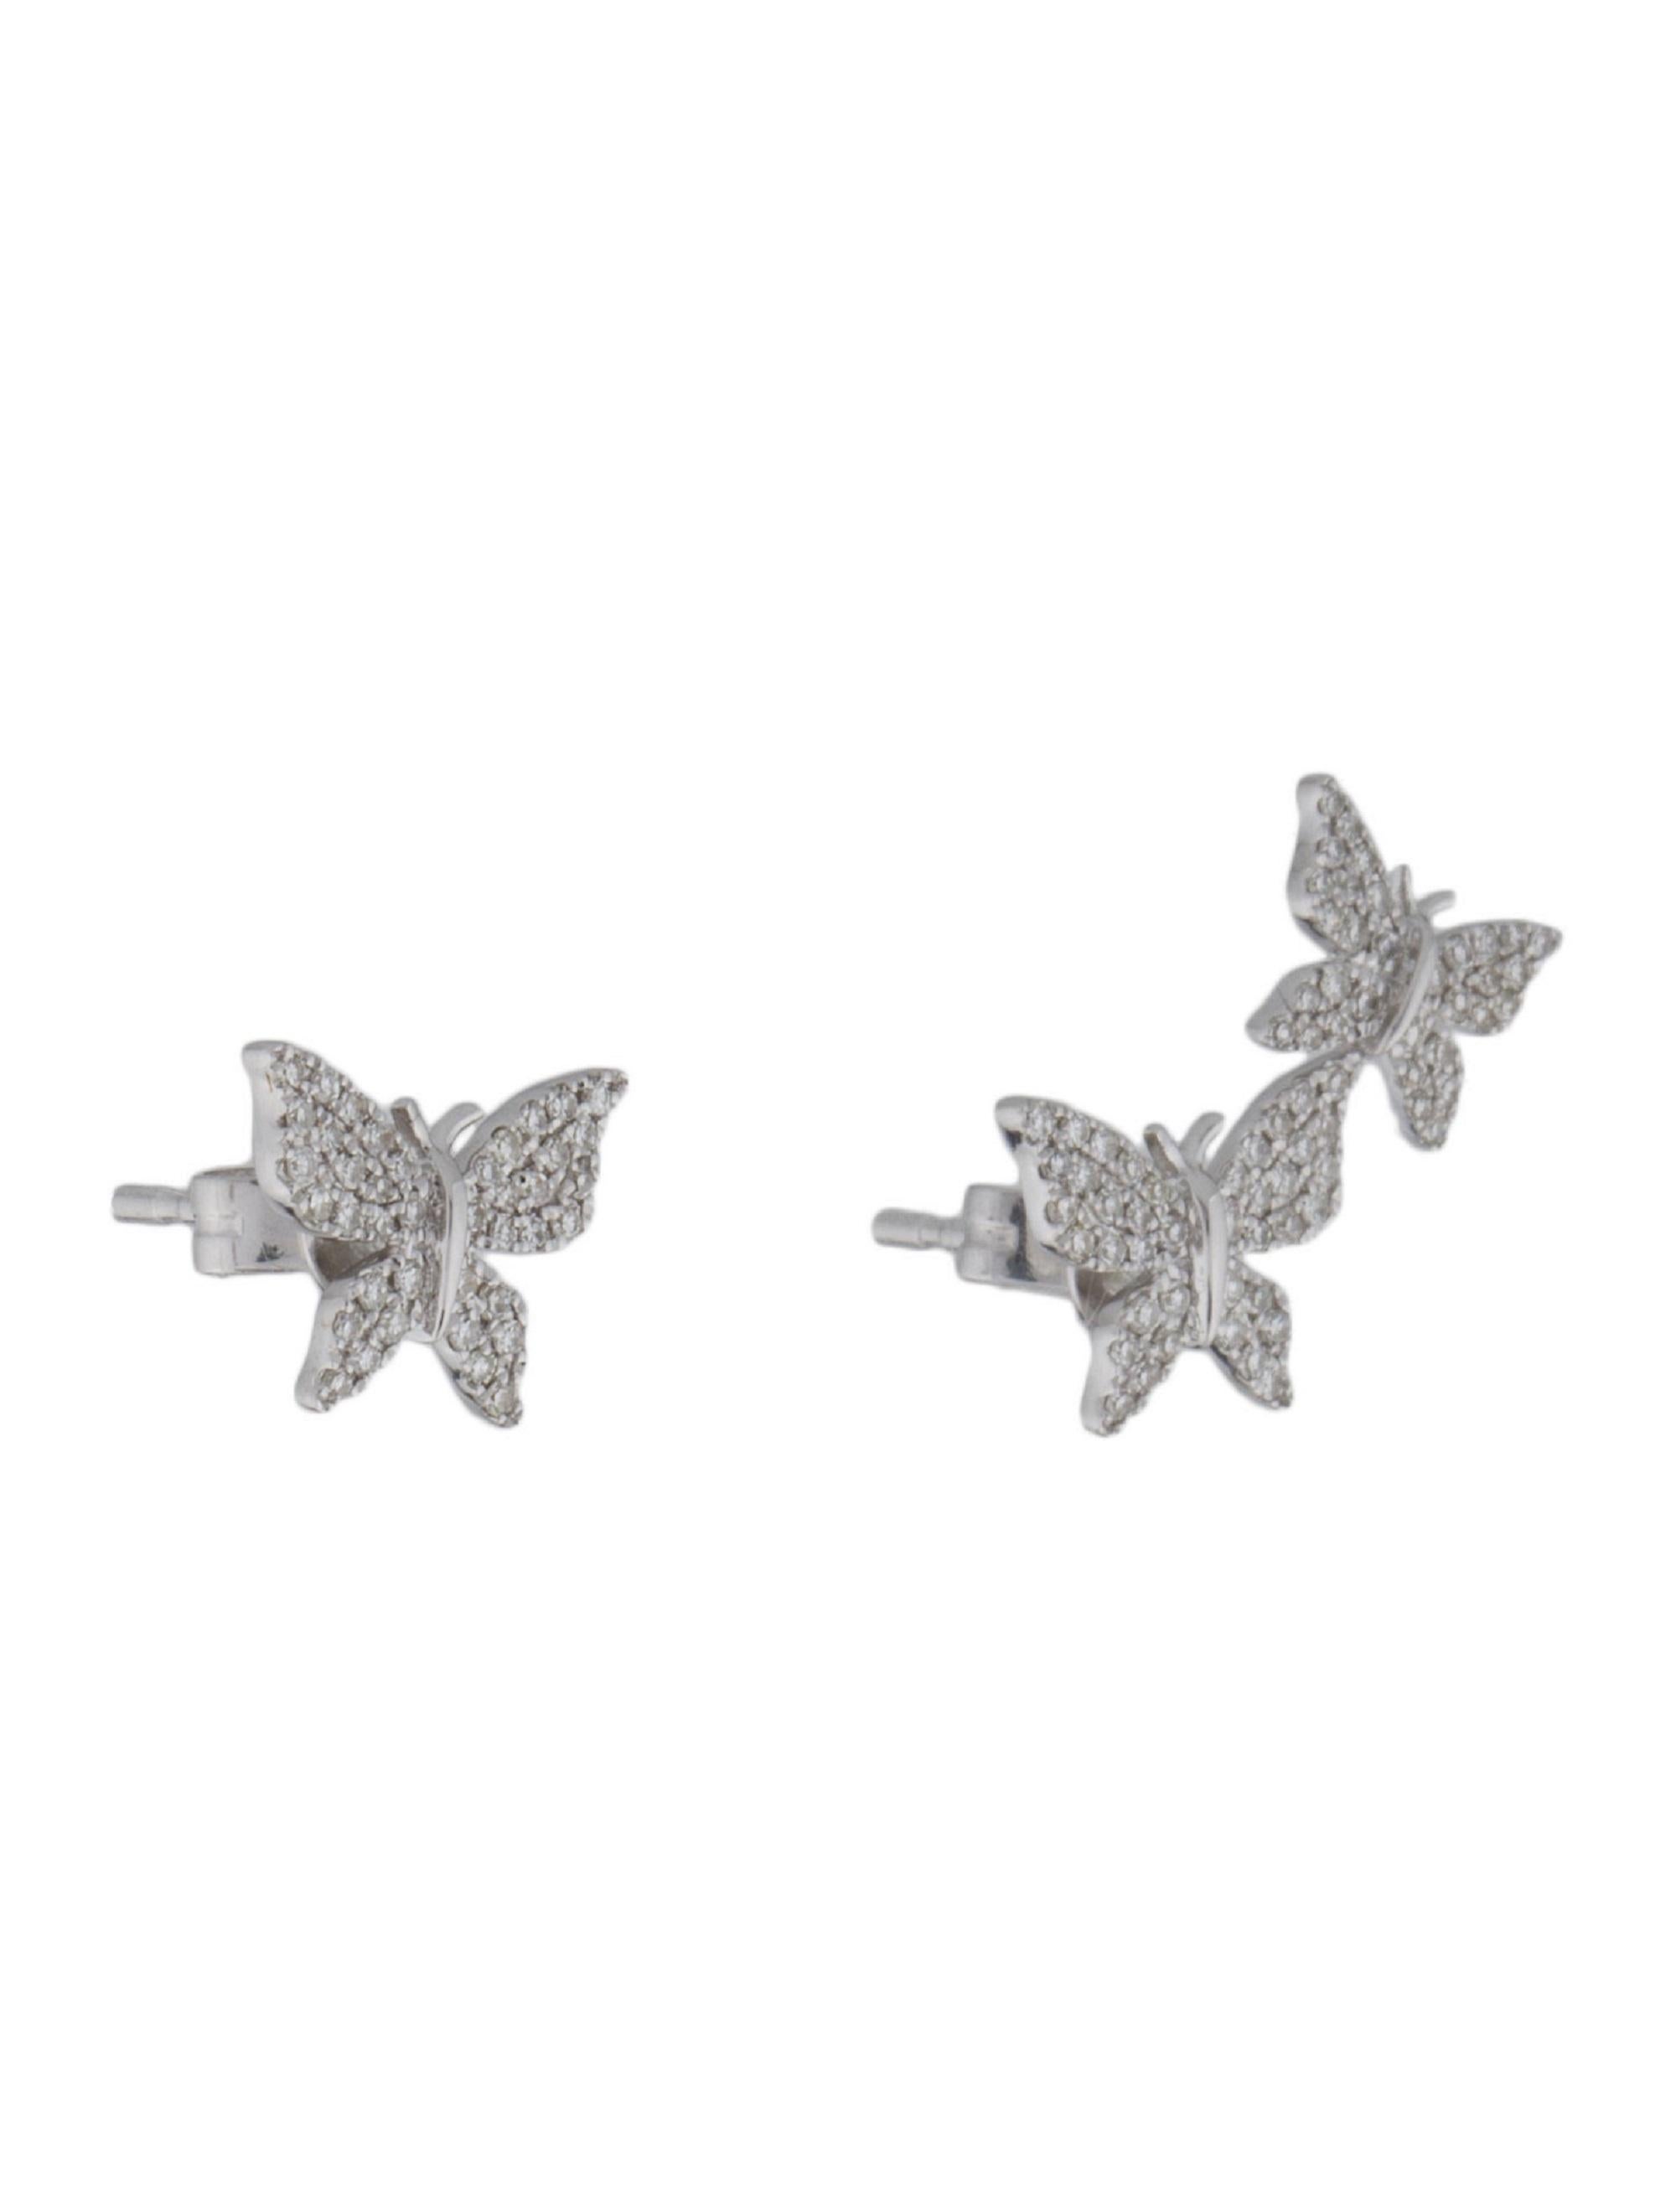 These trendy and sweet Mismatched Butterfly Earrings crafted of 14k gold and round diamonds create an illusion of a second ear piercing although its just an ear climber on one side! Featuring approximately 0.35ct of diamonds GH-SI color and clarity.